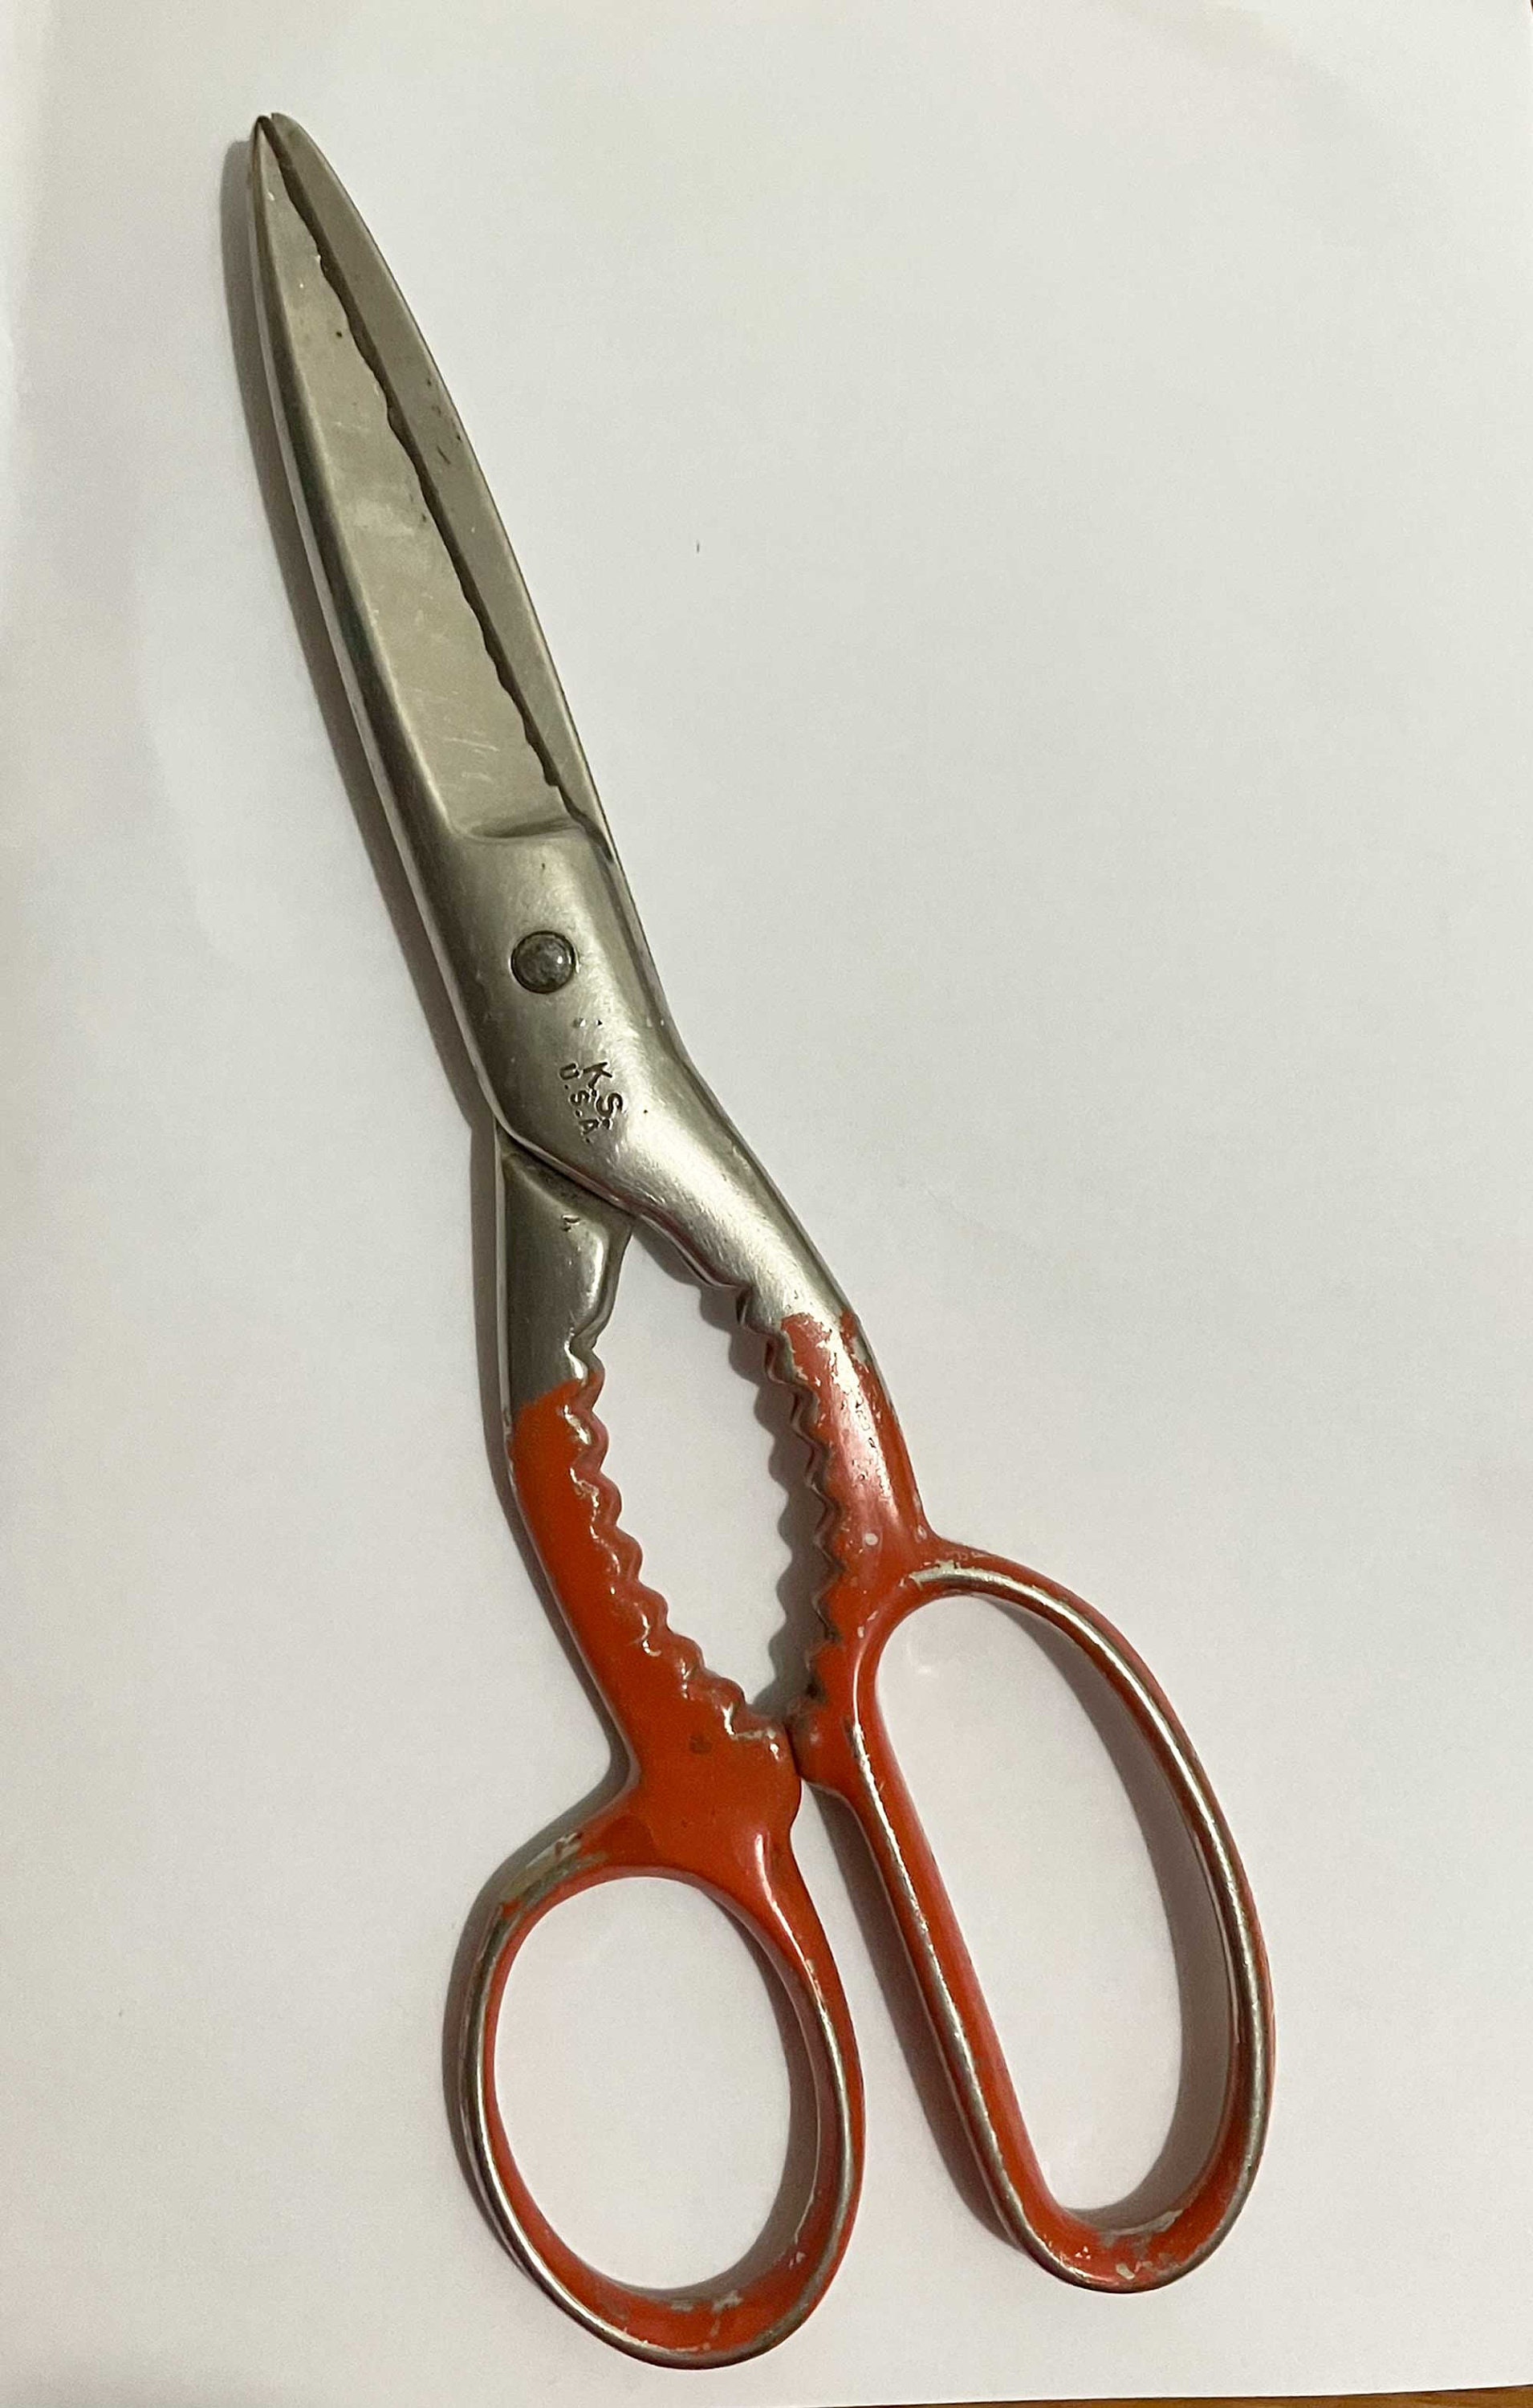 VINTAGE WISS NEWARK NEW JERSEY USA MODEL C 9 PINKING SHEARS SCIZZORS IN BOX